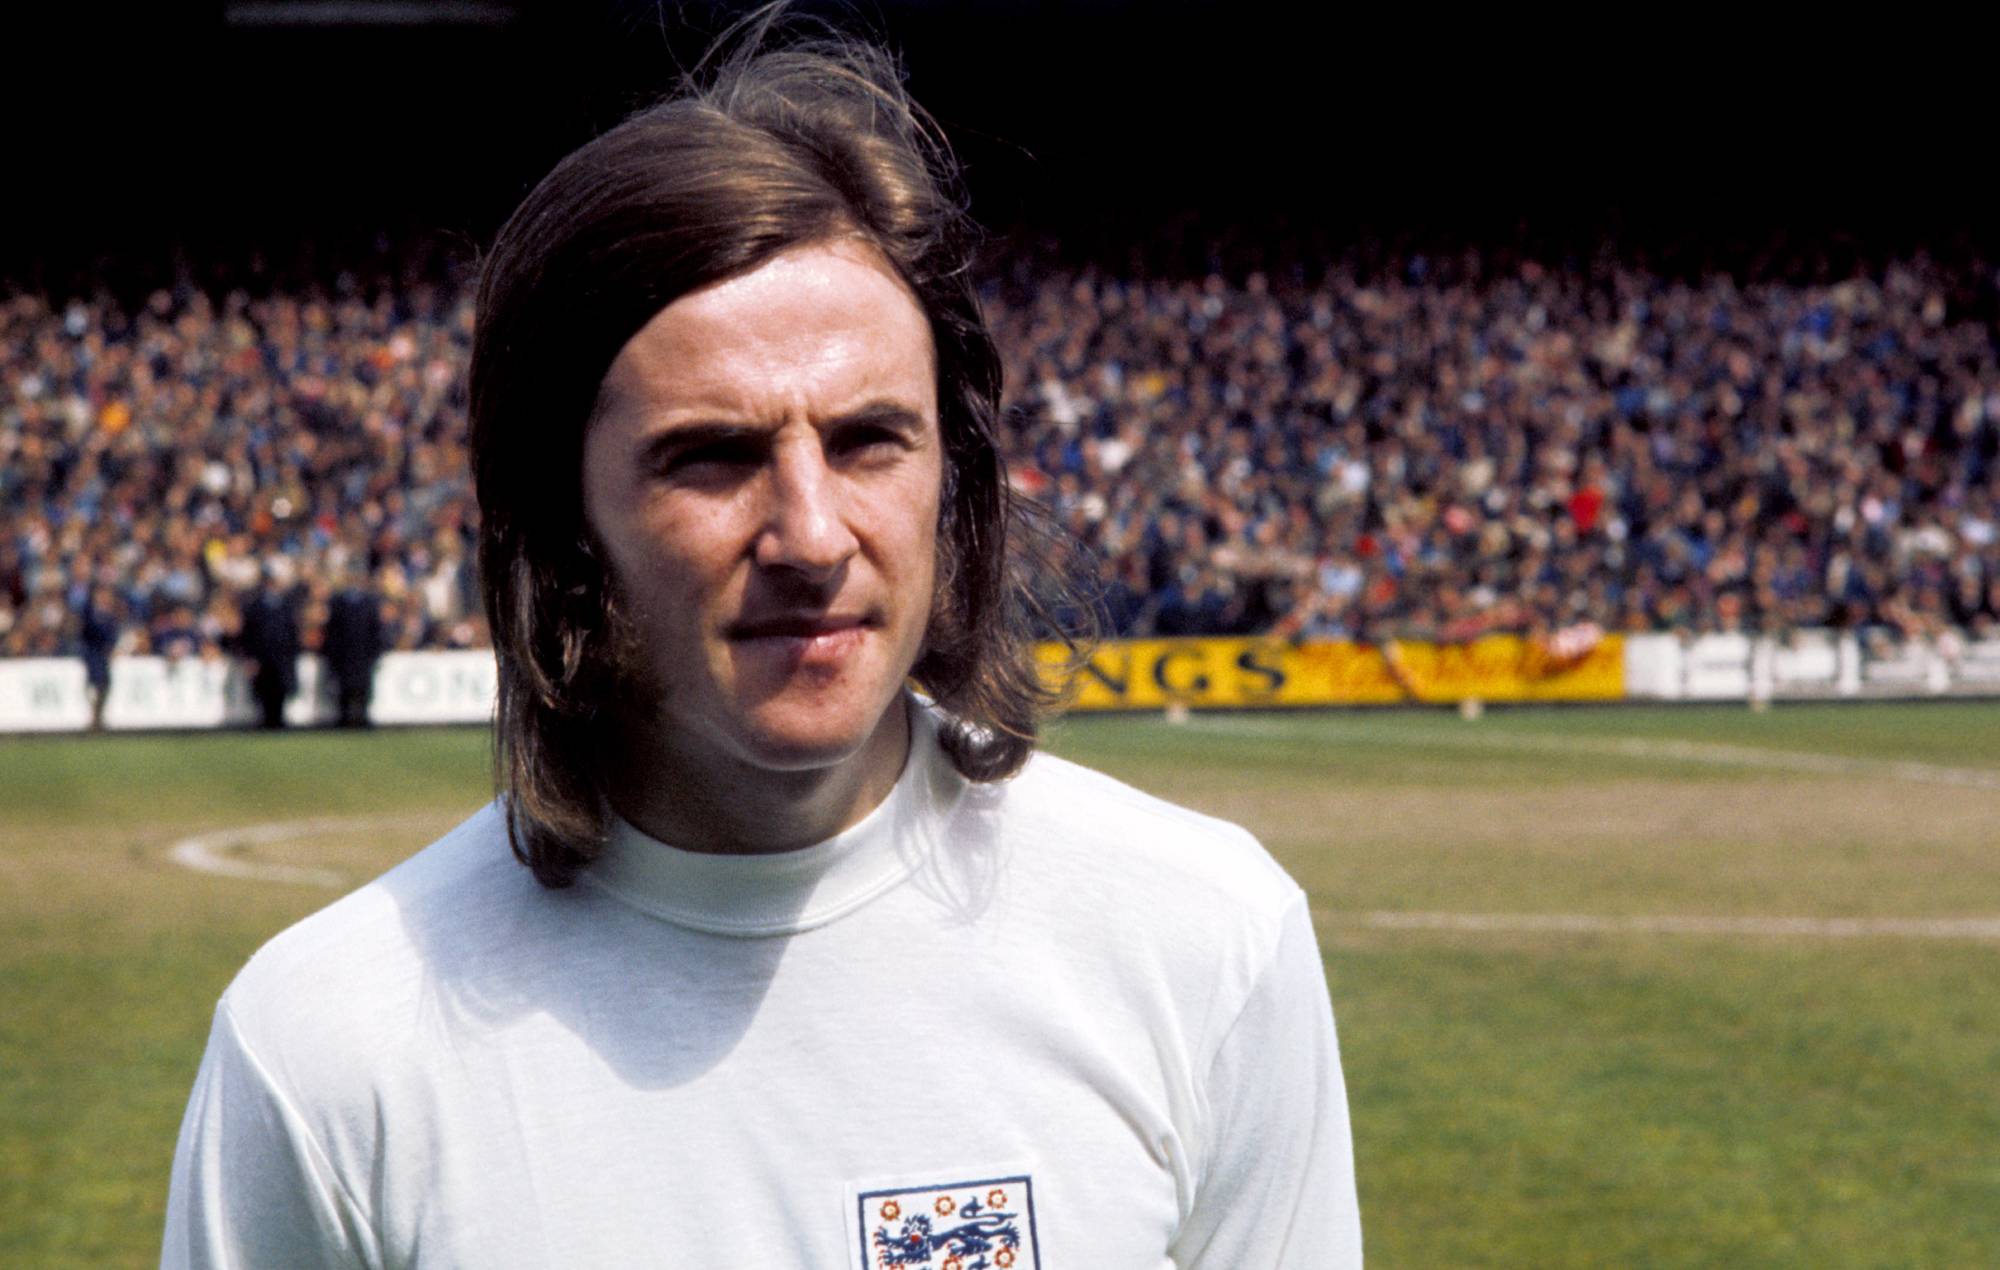 Entertainment world pays tribute to late footballer Stan Bowles